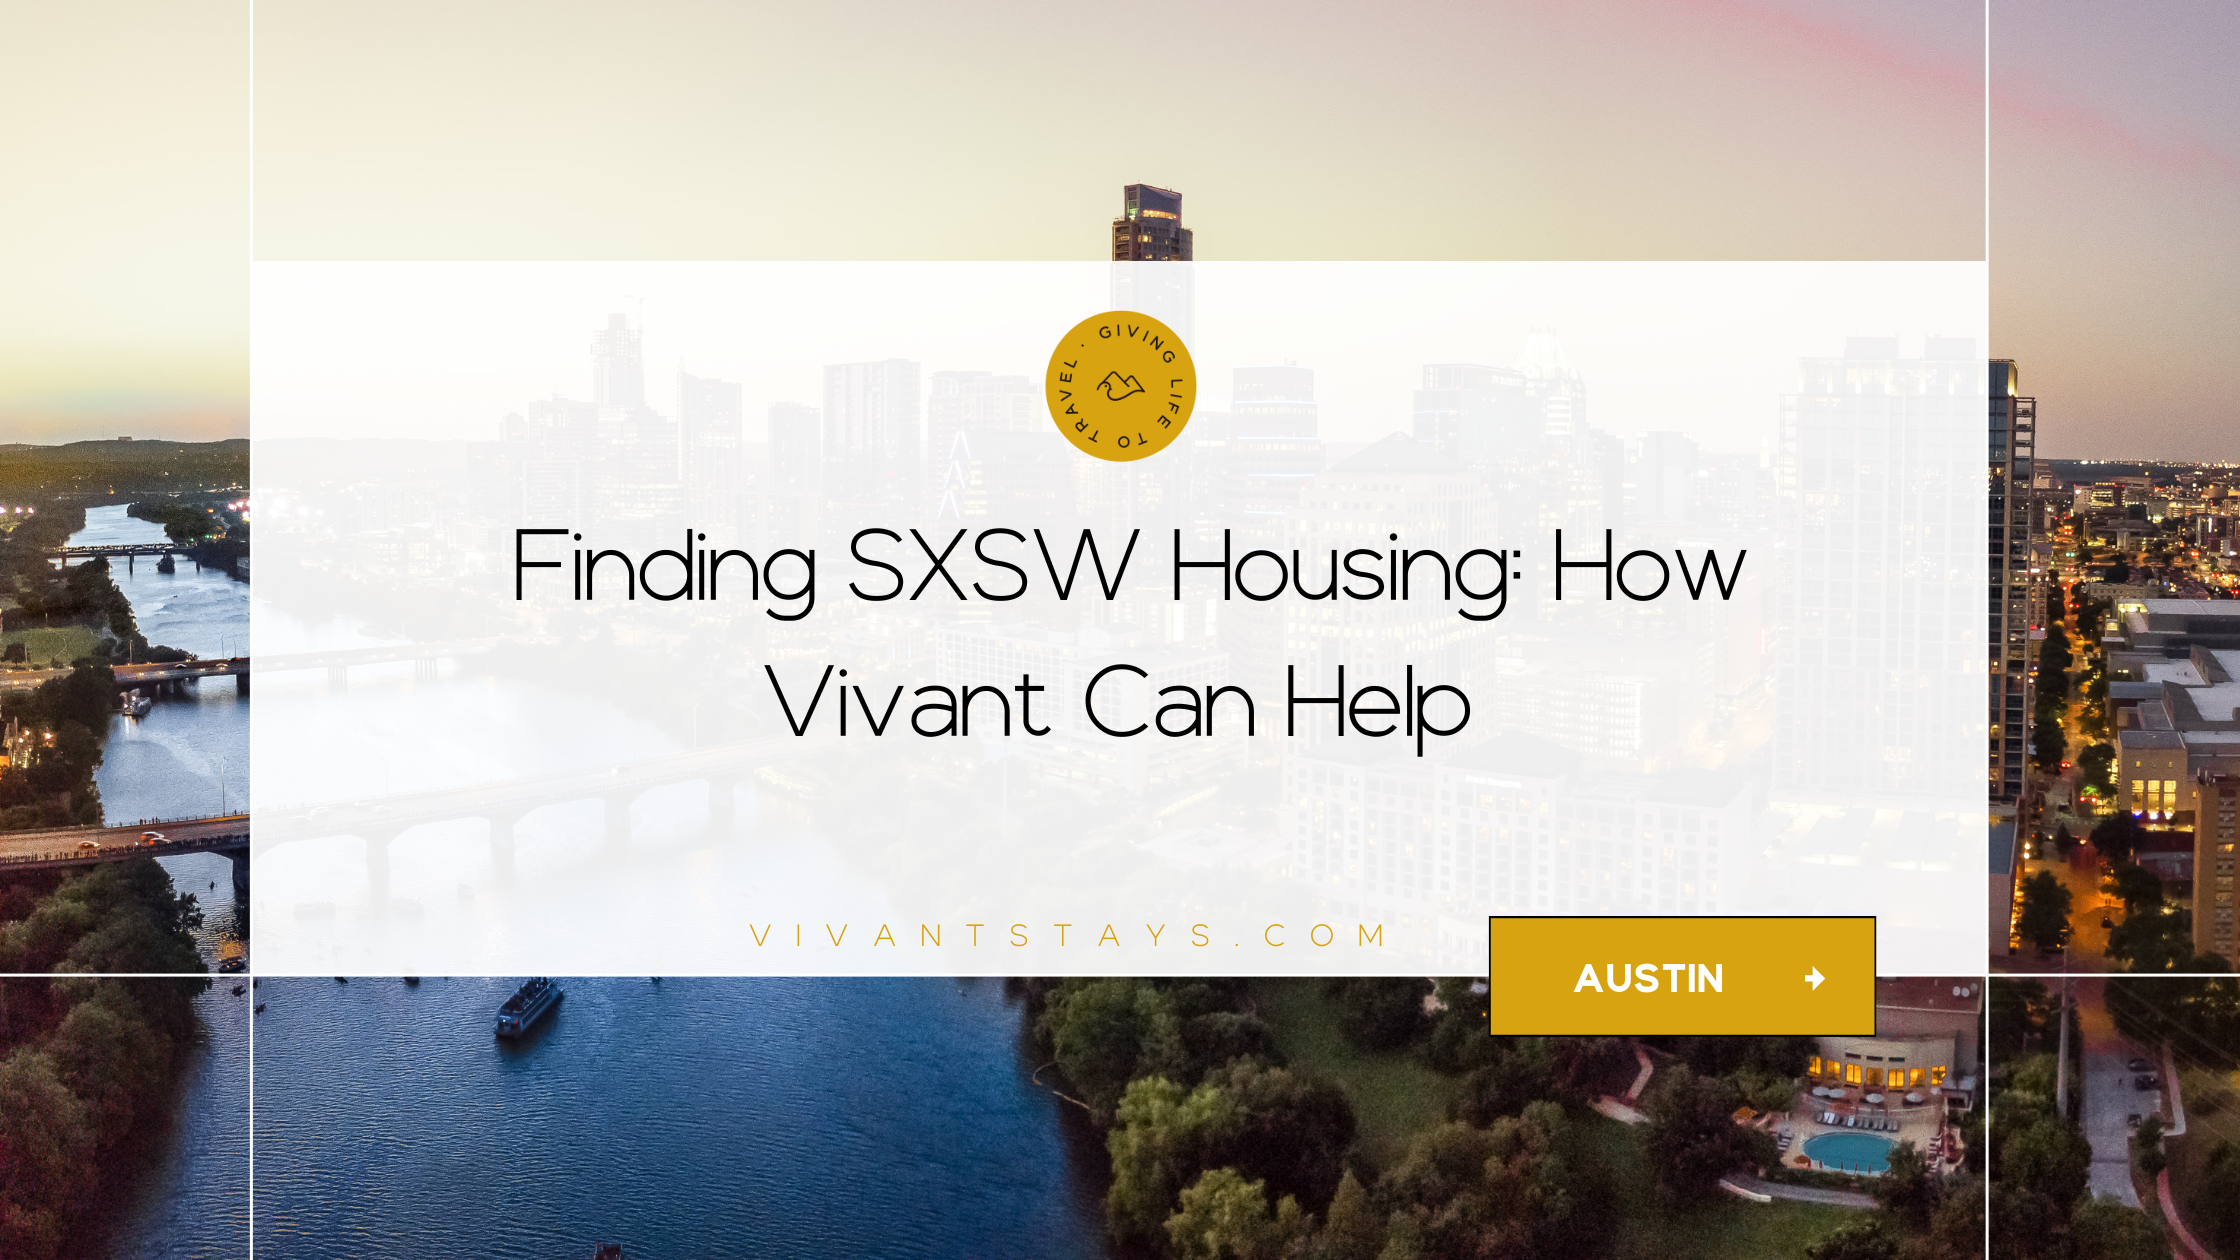 Image of Austin's lake and downtown view with the title "Finding SXSW Housing: How Vivant Can Help"